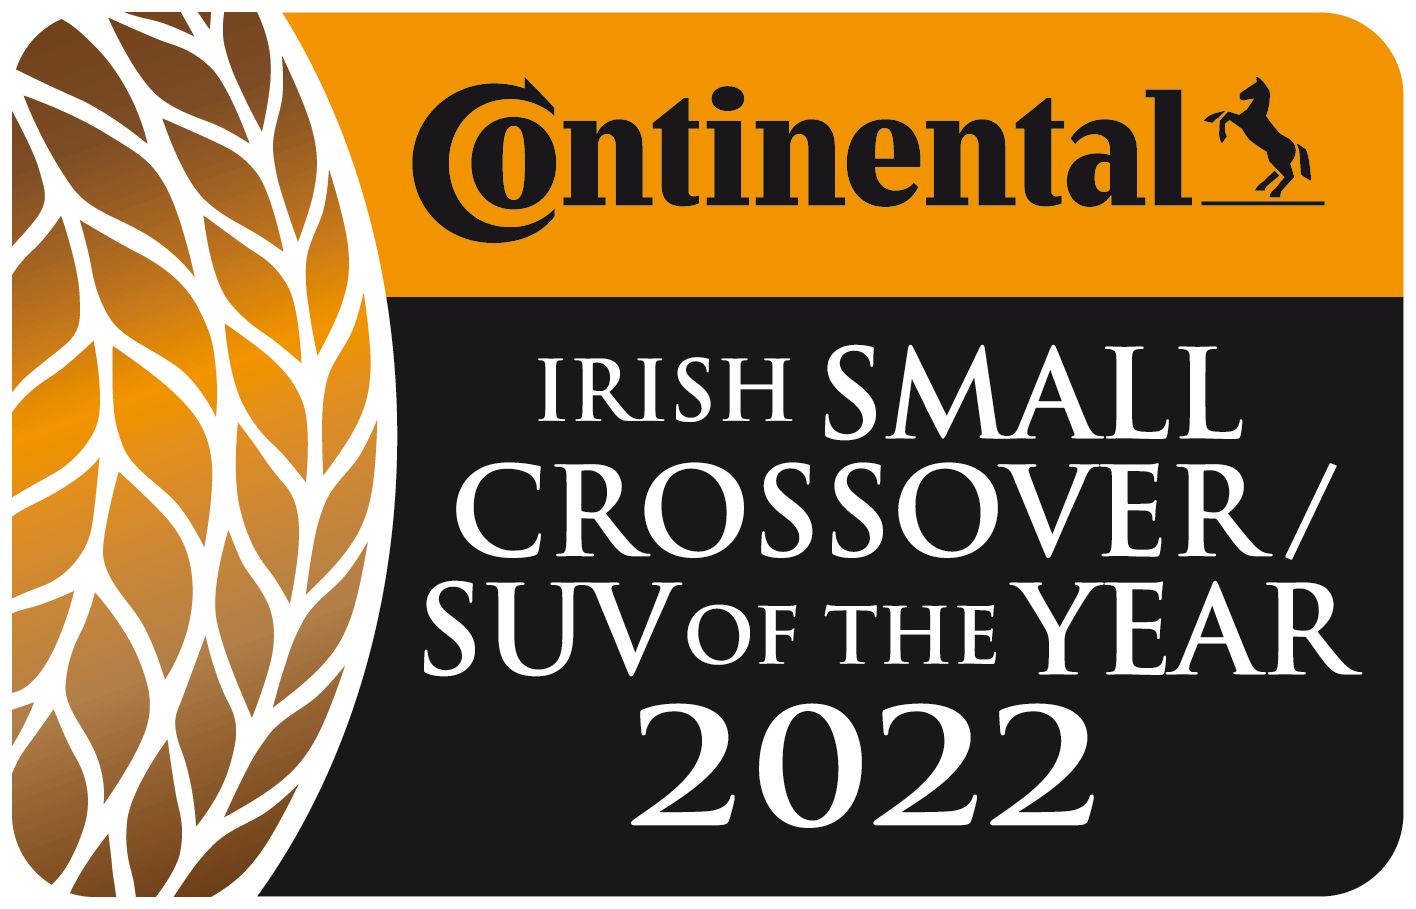 Continental Tyres Irish Small Crossover / SUV of the Year 2022 – Nominees